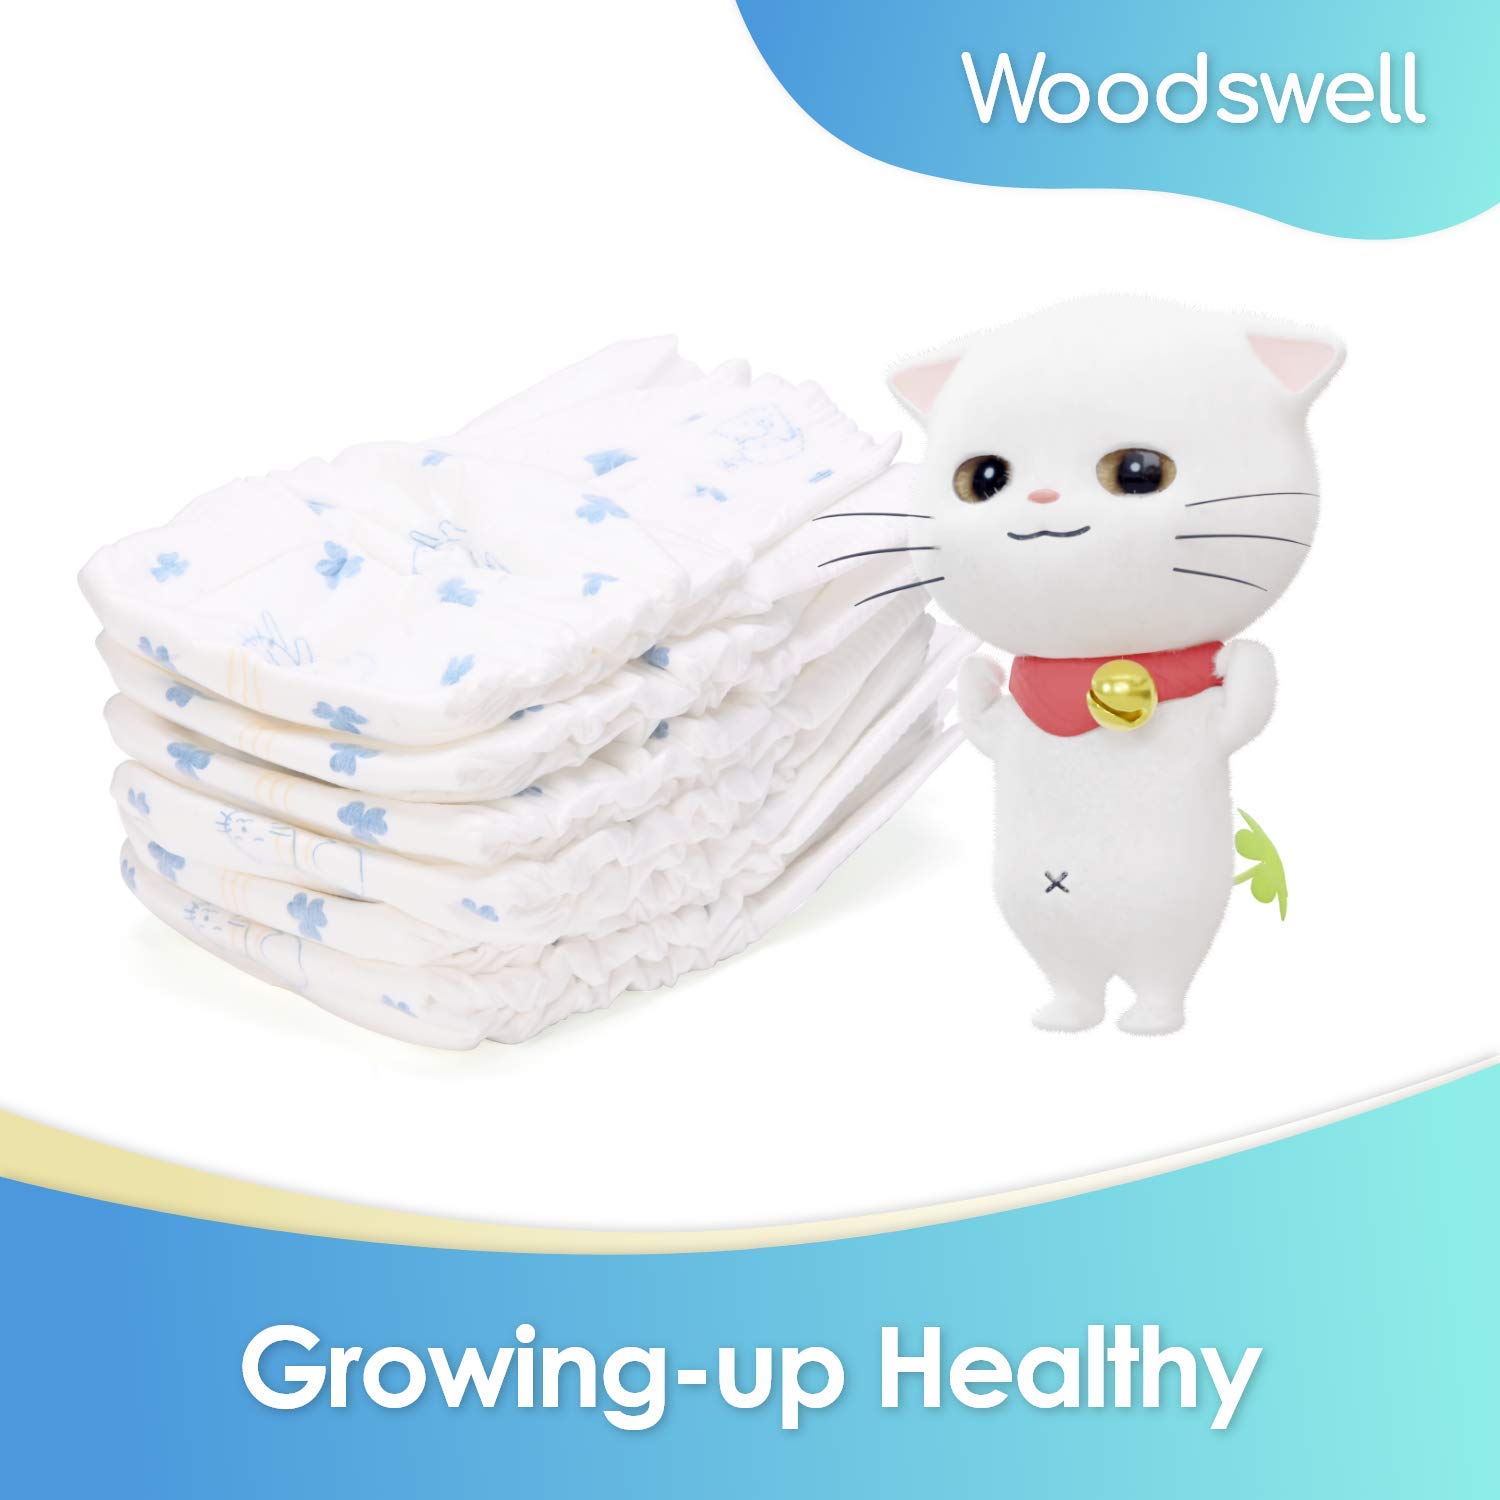 Woodswell Care Baby Diapers (Size 1, 100 Counts) - Hypoallergenic, Double Leak Protection, Ultra Soft, Super Absorbent, Edible Fabric Surface Layer